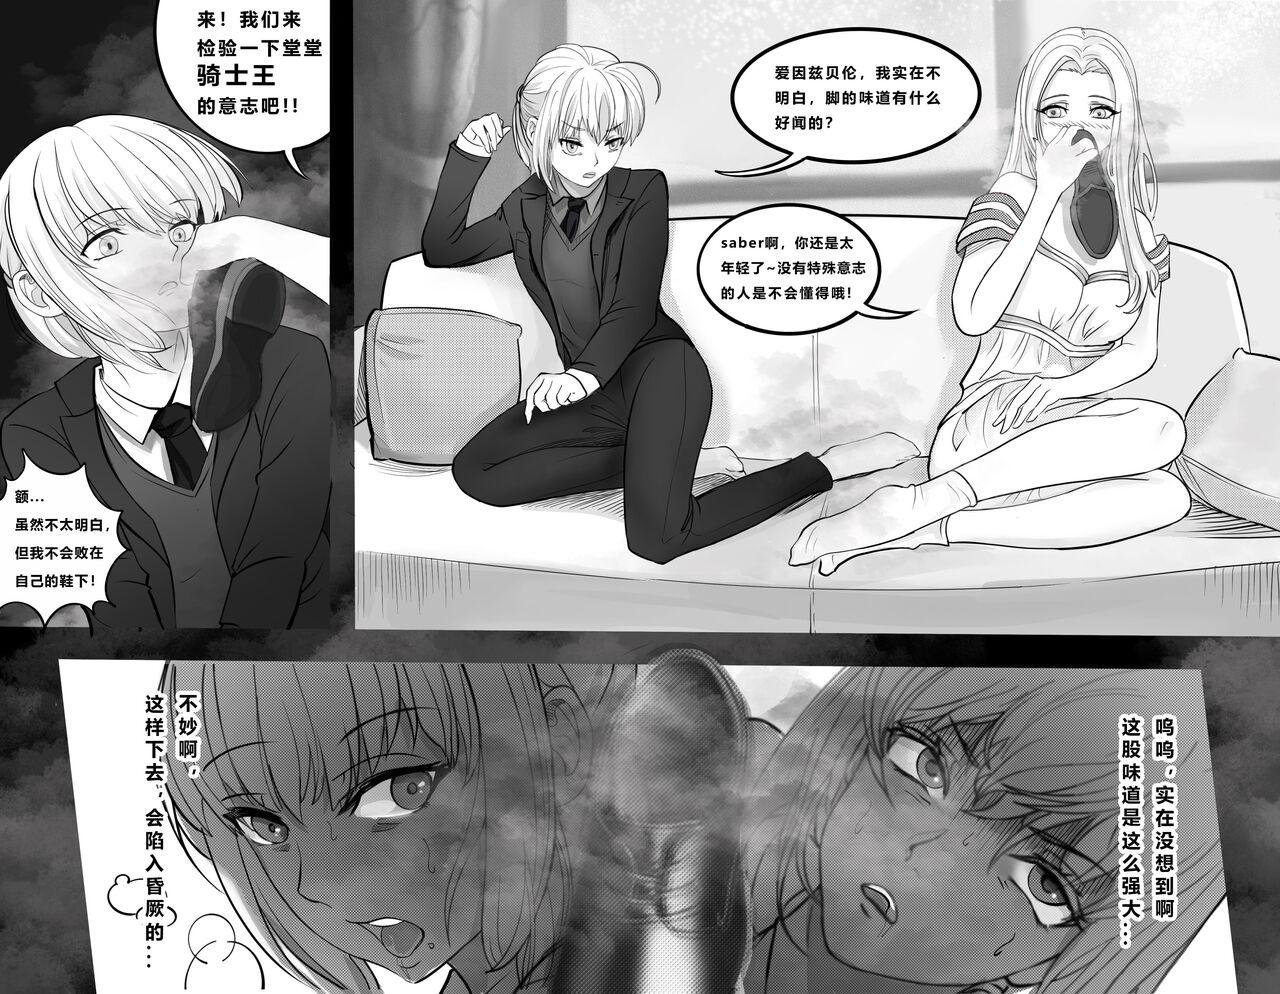 Sensual FATE REQUEST CHINESE VERSION - Fate stay night Amateurporn - Page 3